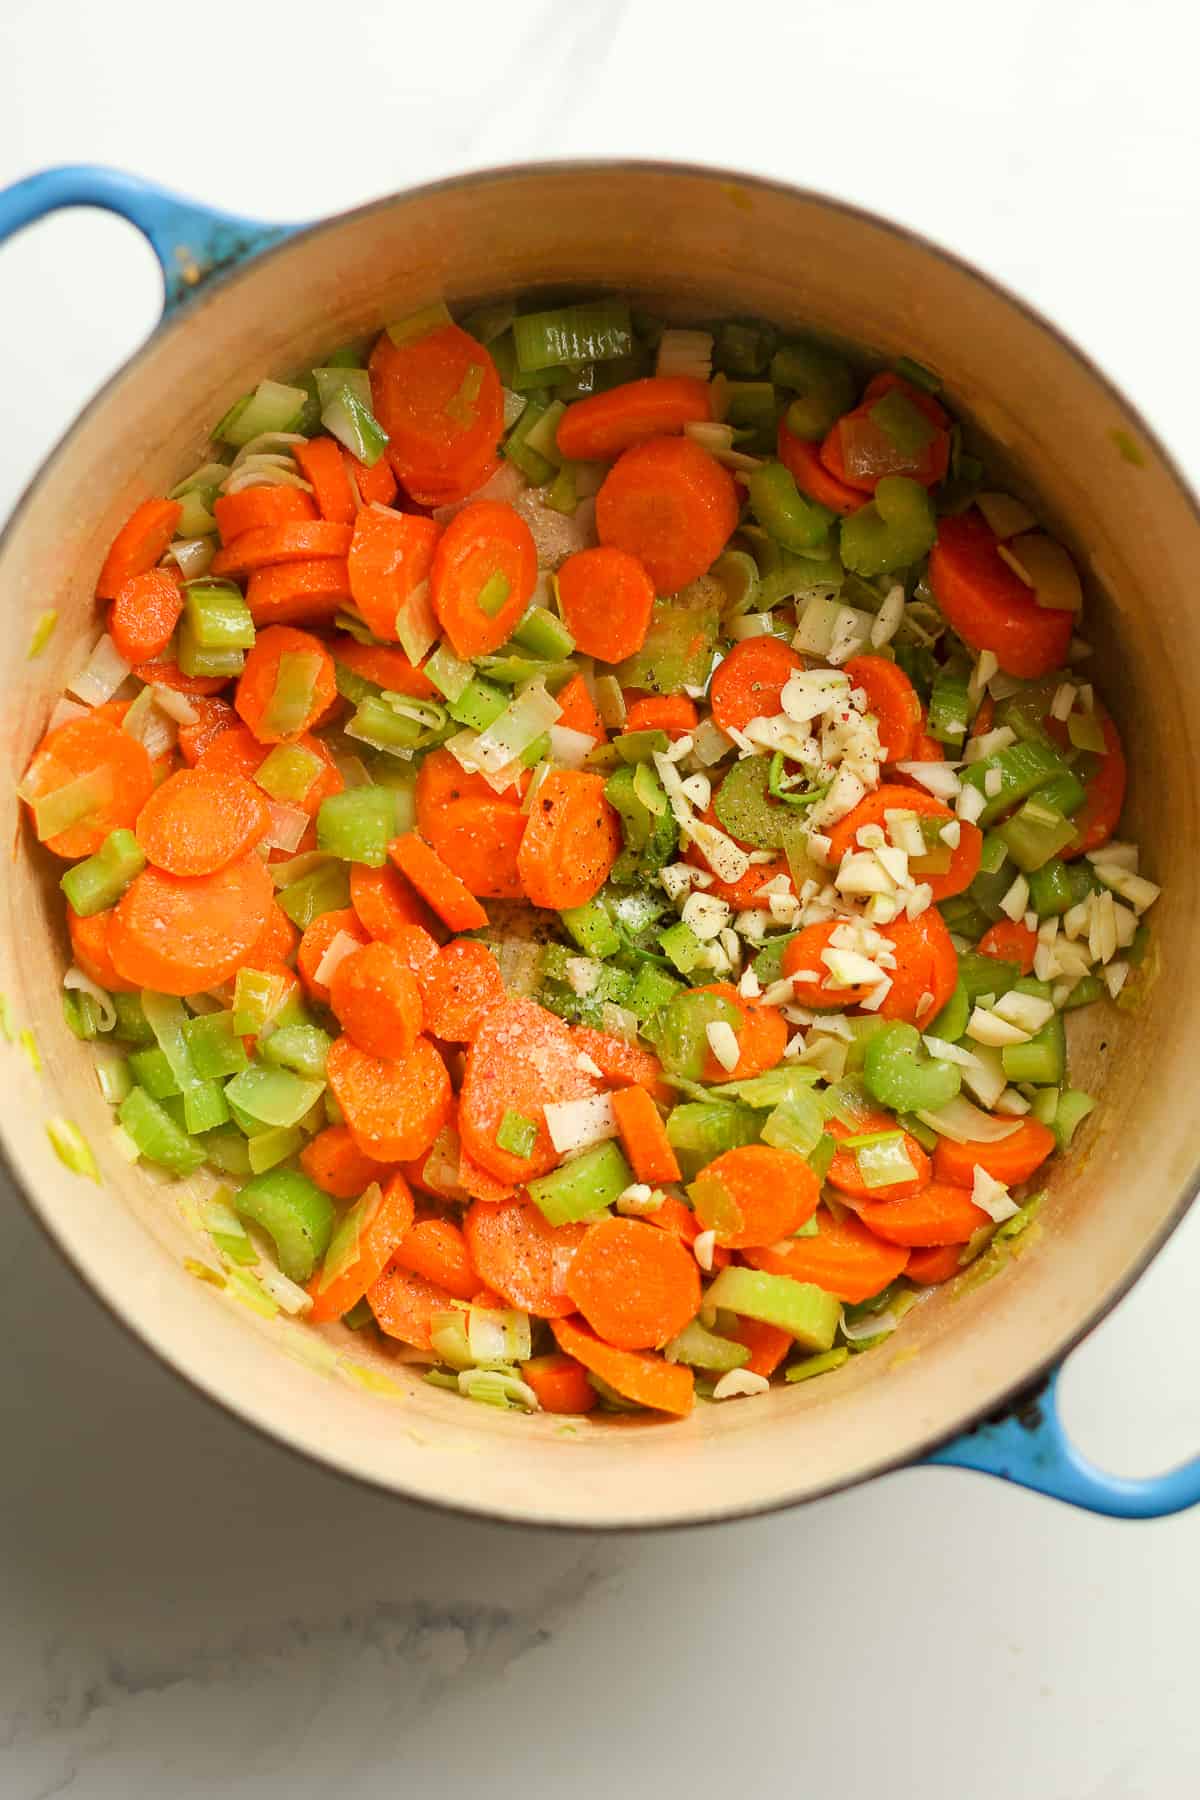 A stock pot of veggies for the soup.